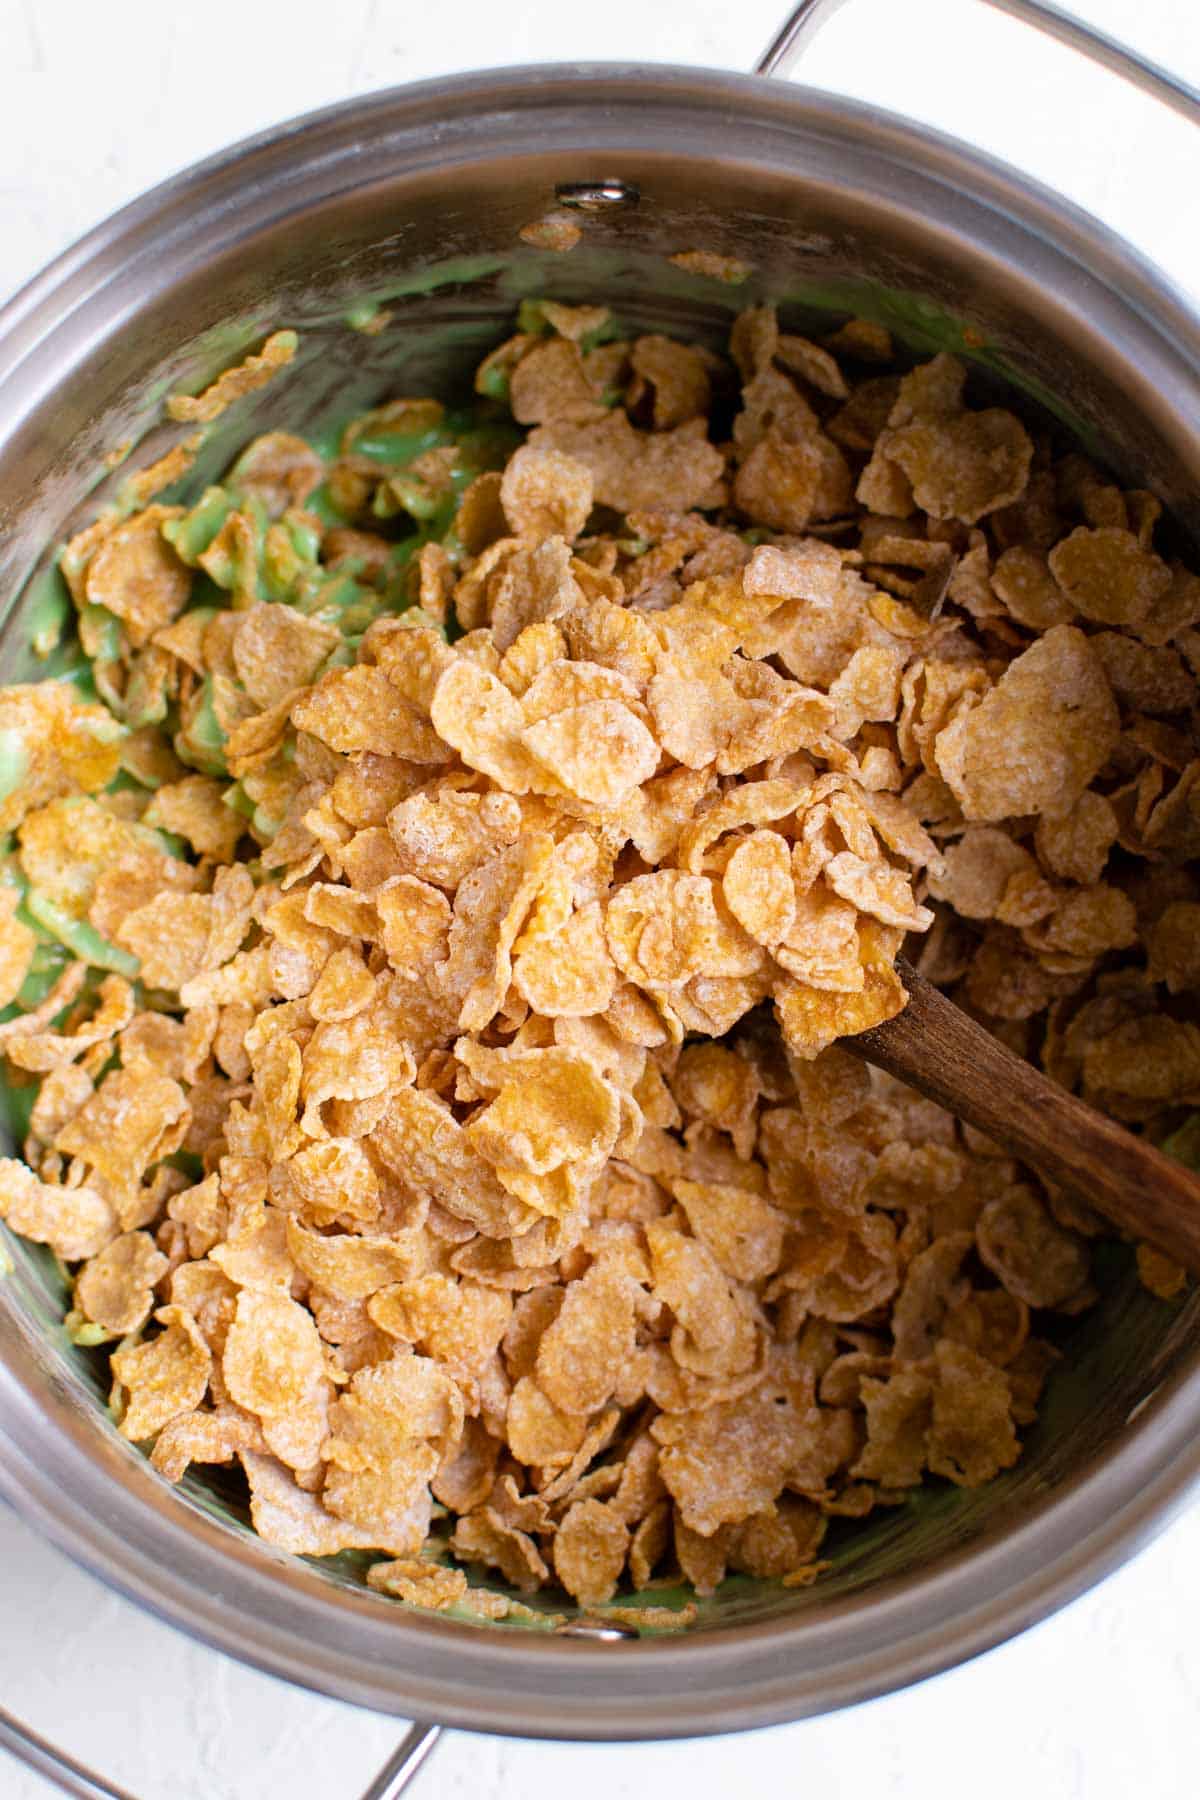 Cornflake cereal is being mixed into the green marshmallow mixture